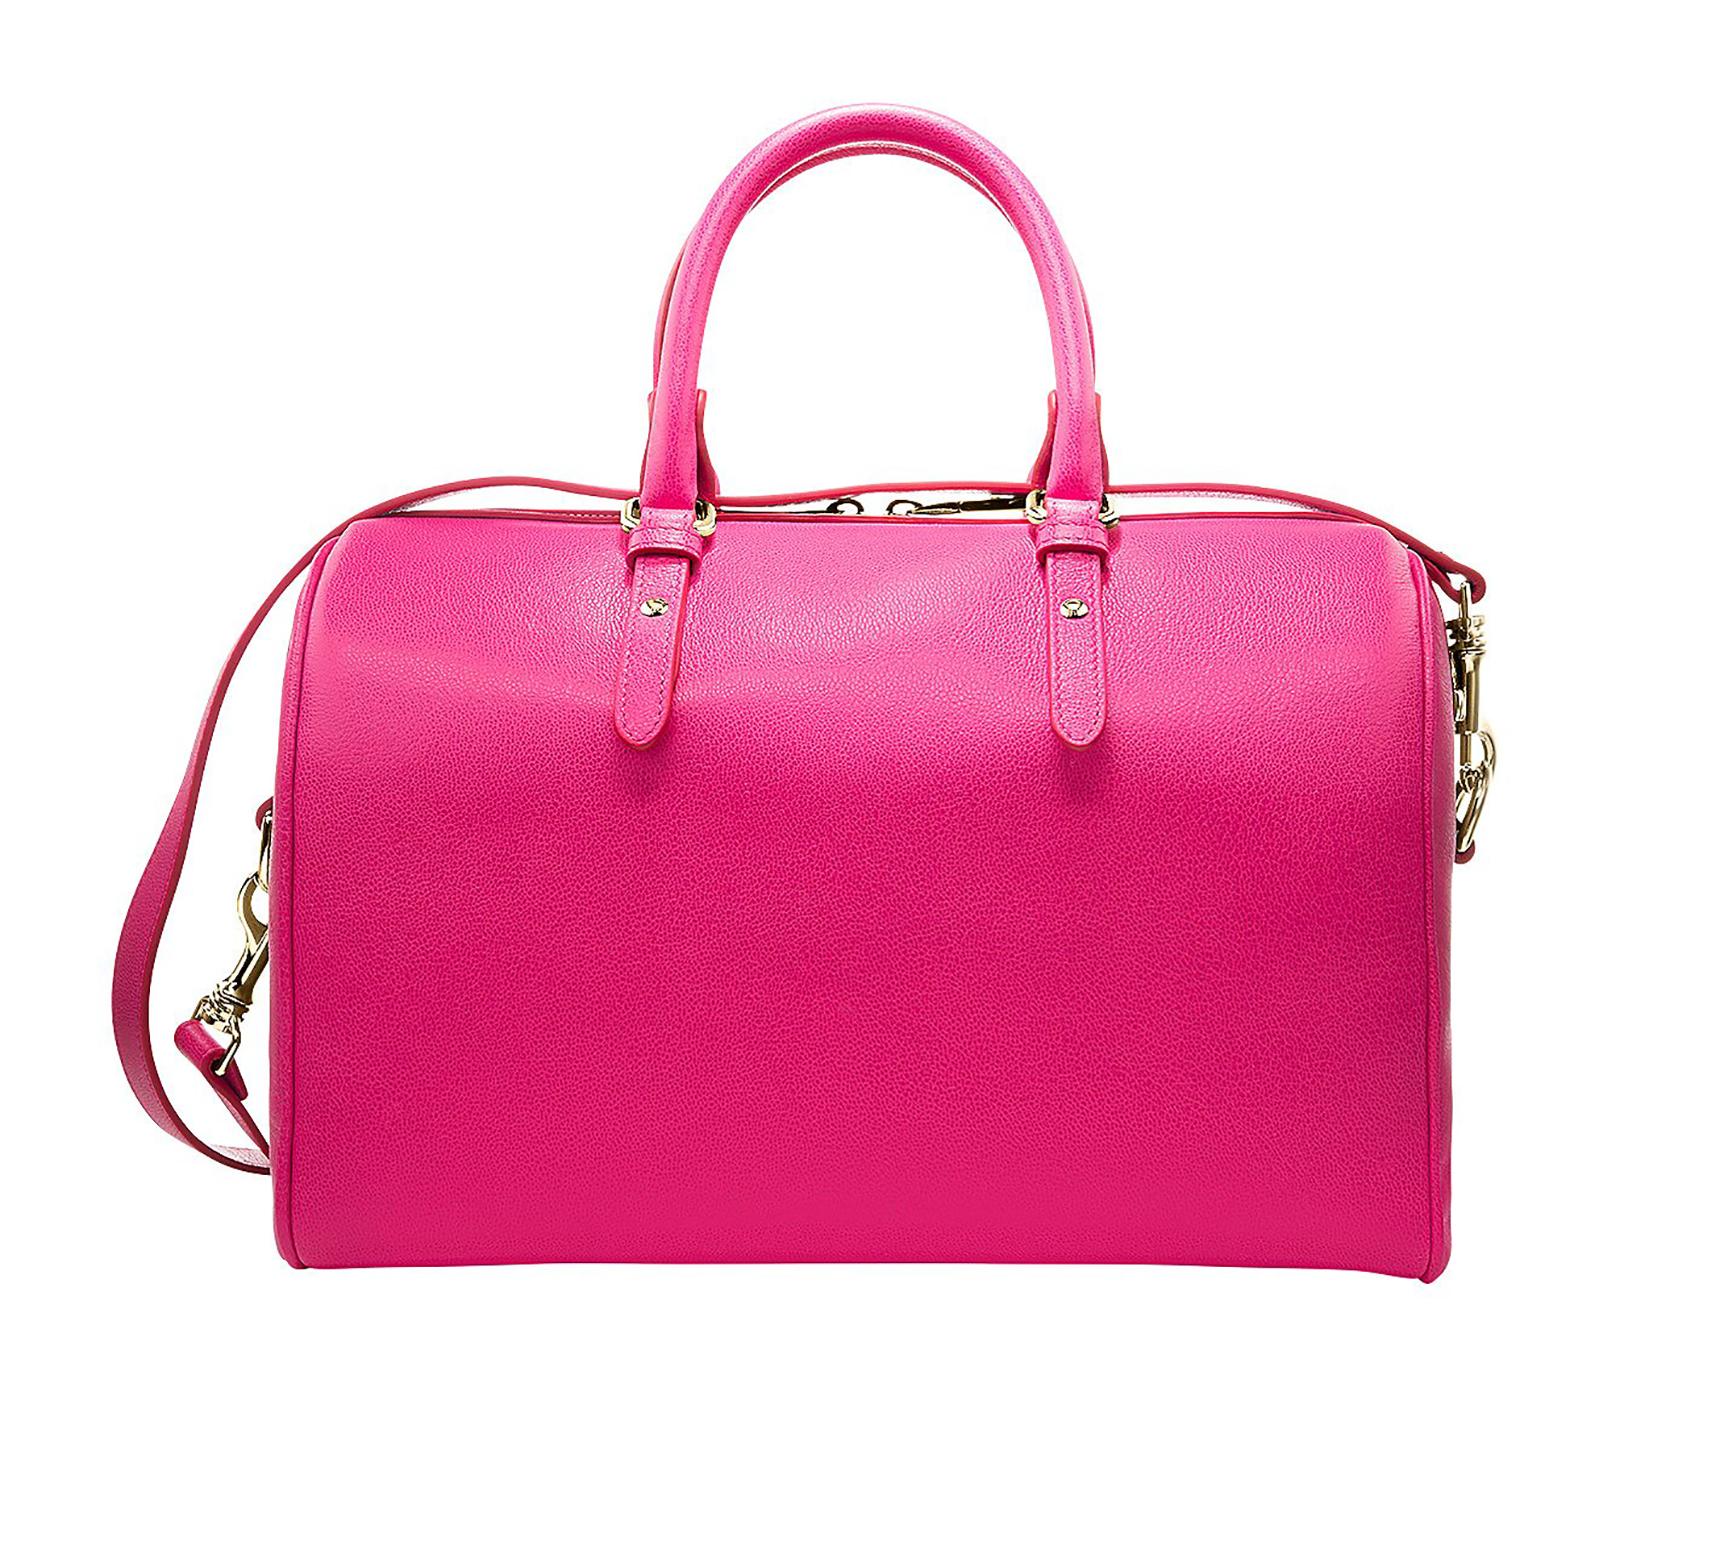 Pink VERSACE PALAZZO LEATHER TOTE BAG in ORCHID PINK